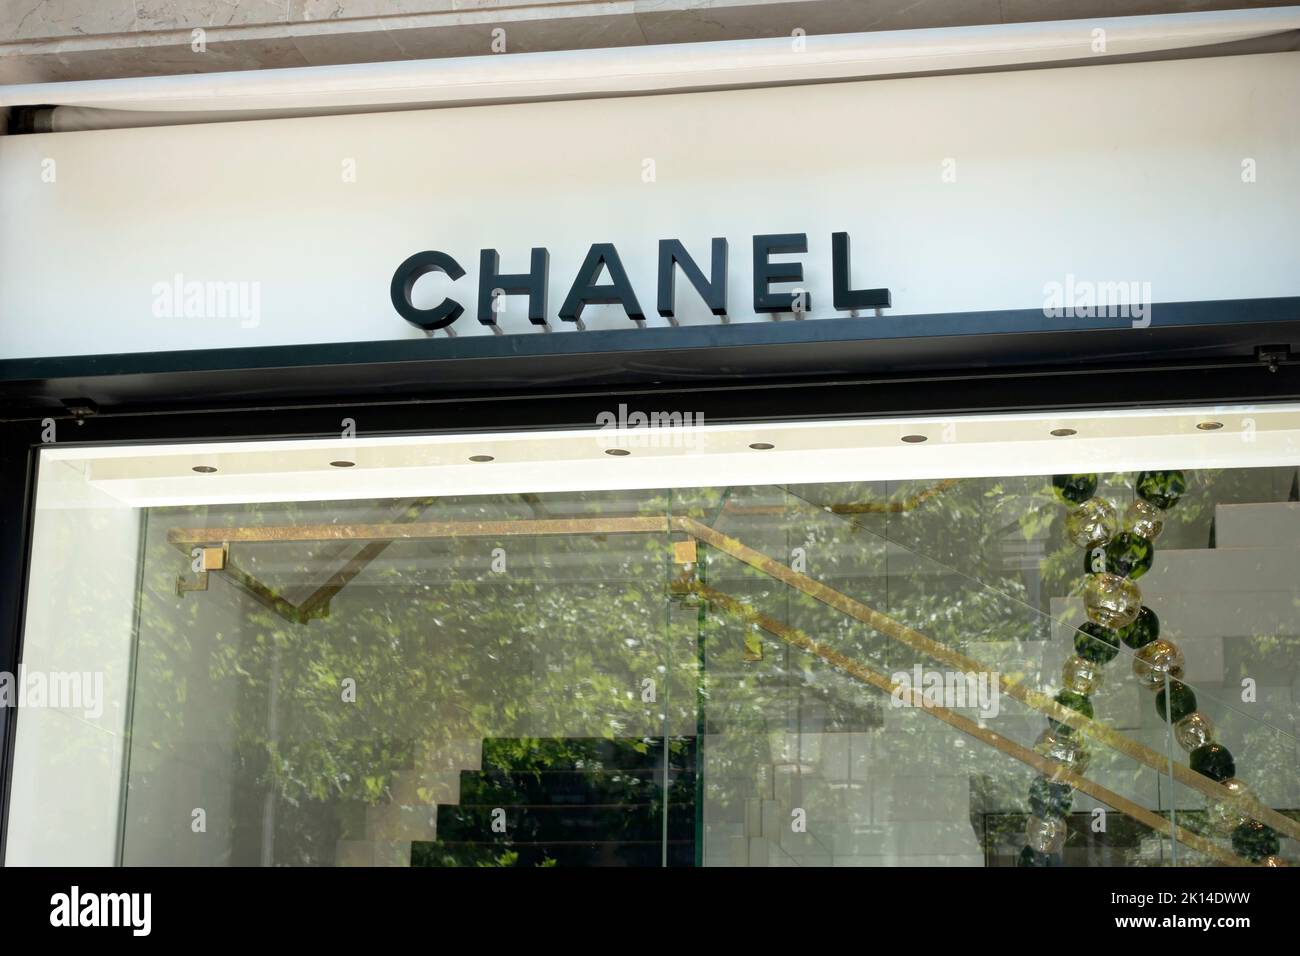 Barcelona, Spain - May 9, 2022. Chanel store sign on a wall. Chanel is a French luxury fashion house. Stock Photo